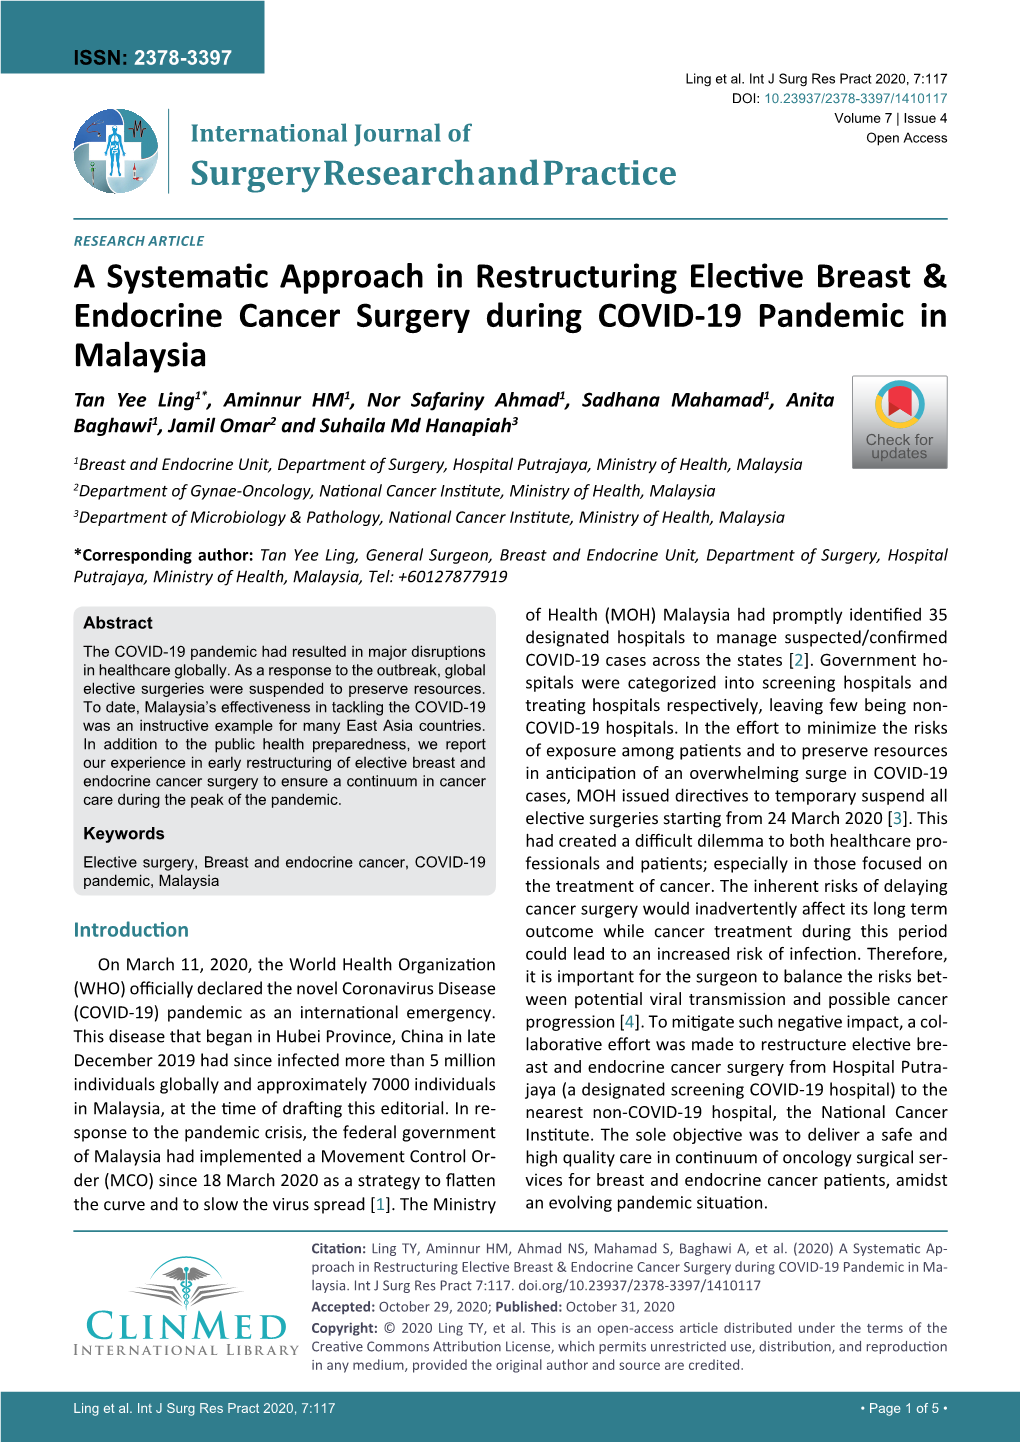 A Systematic Approach in Restructuring Elective Breast